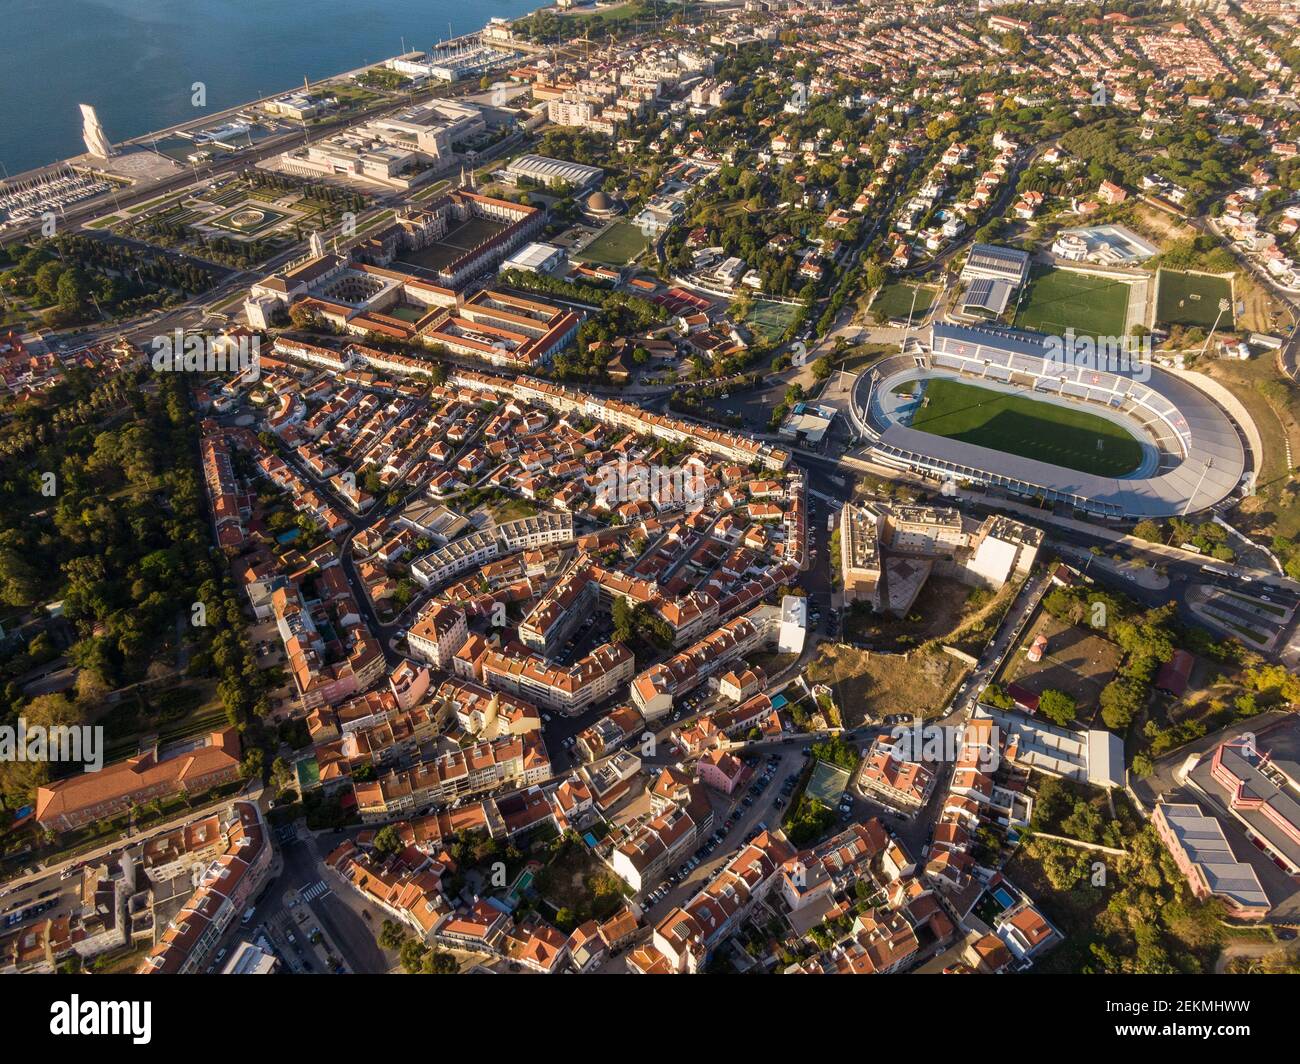 Aerial view of Belem District and Tagus River at sunrise in Lisbon, Portugal. Stock Photo